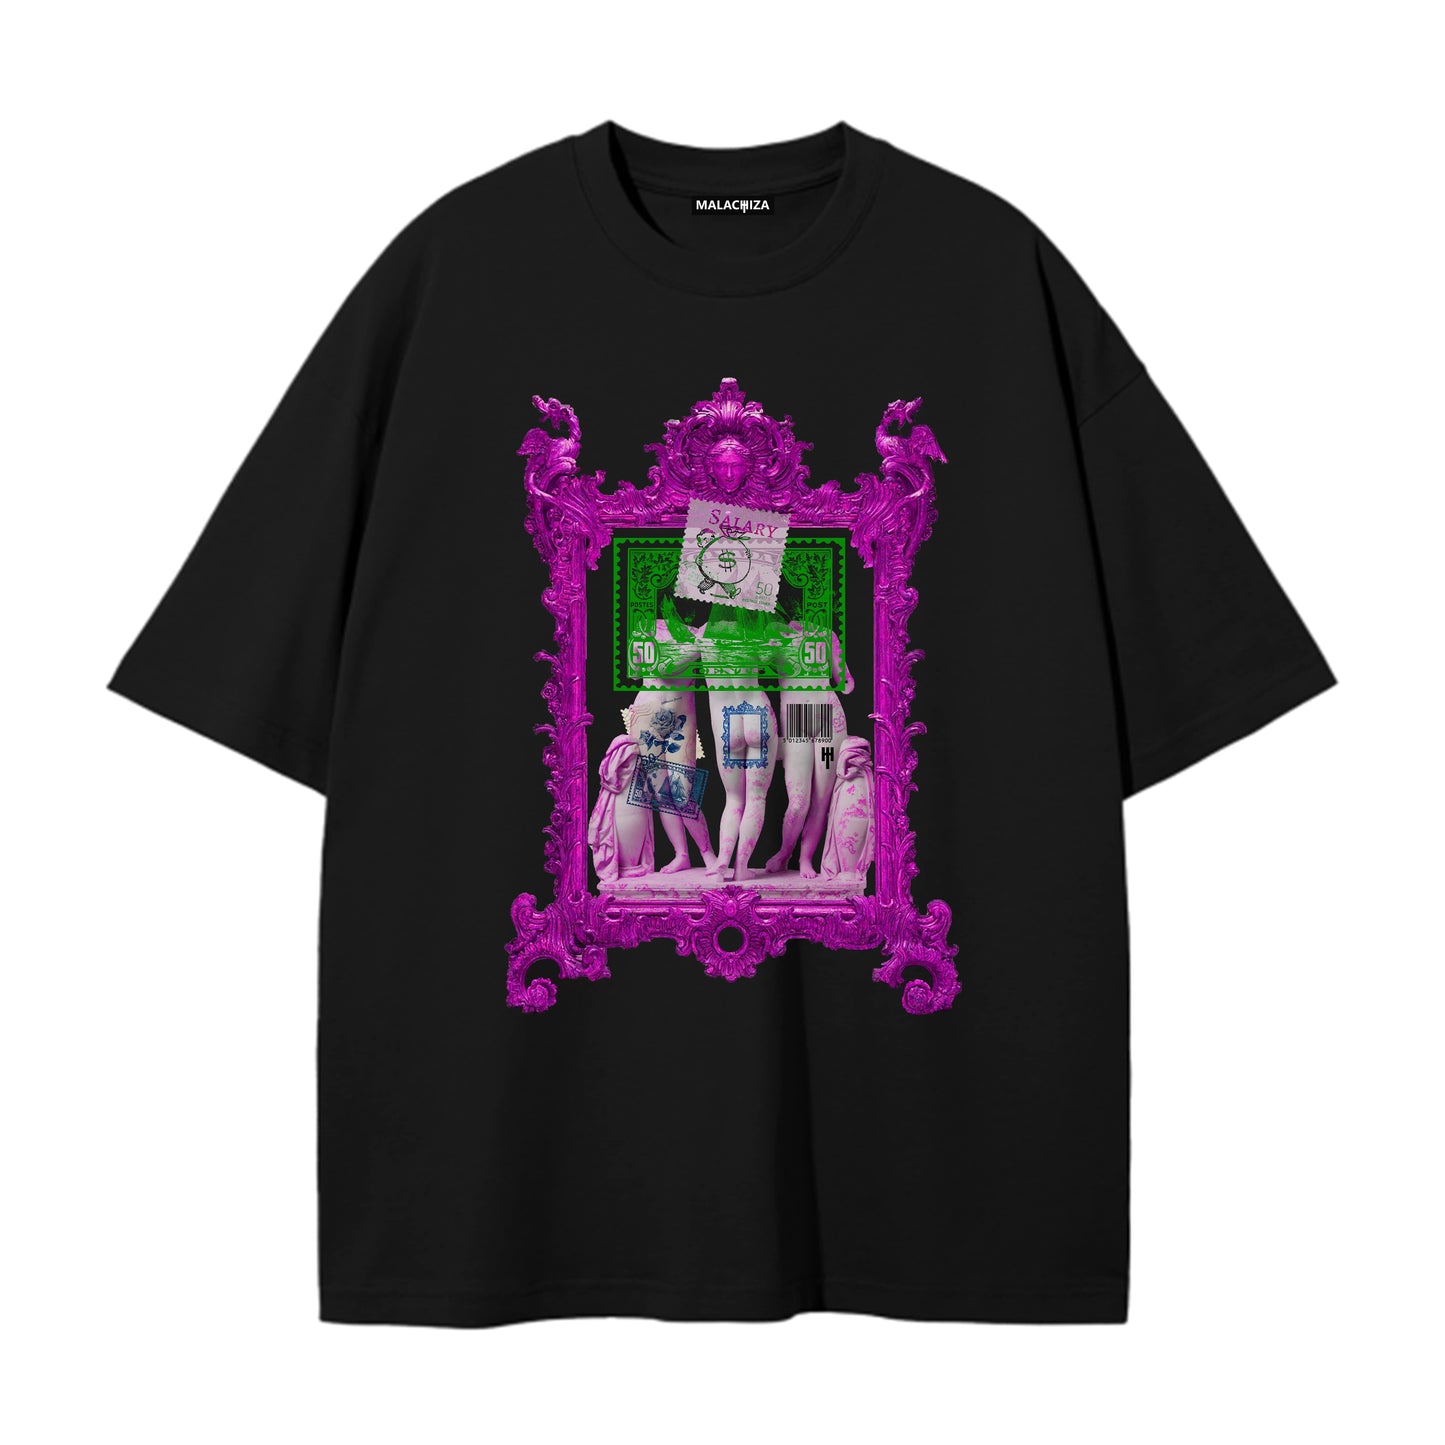 Flat product image of an oversized black t-shirt with a digitally printed design.